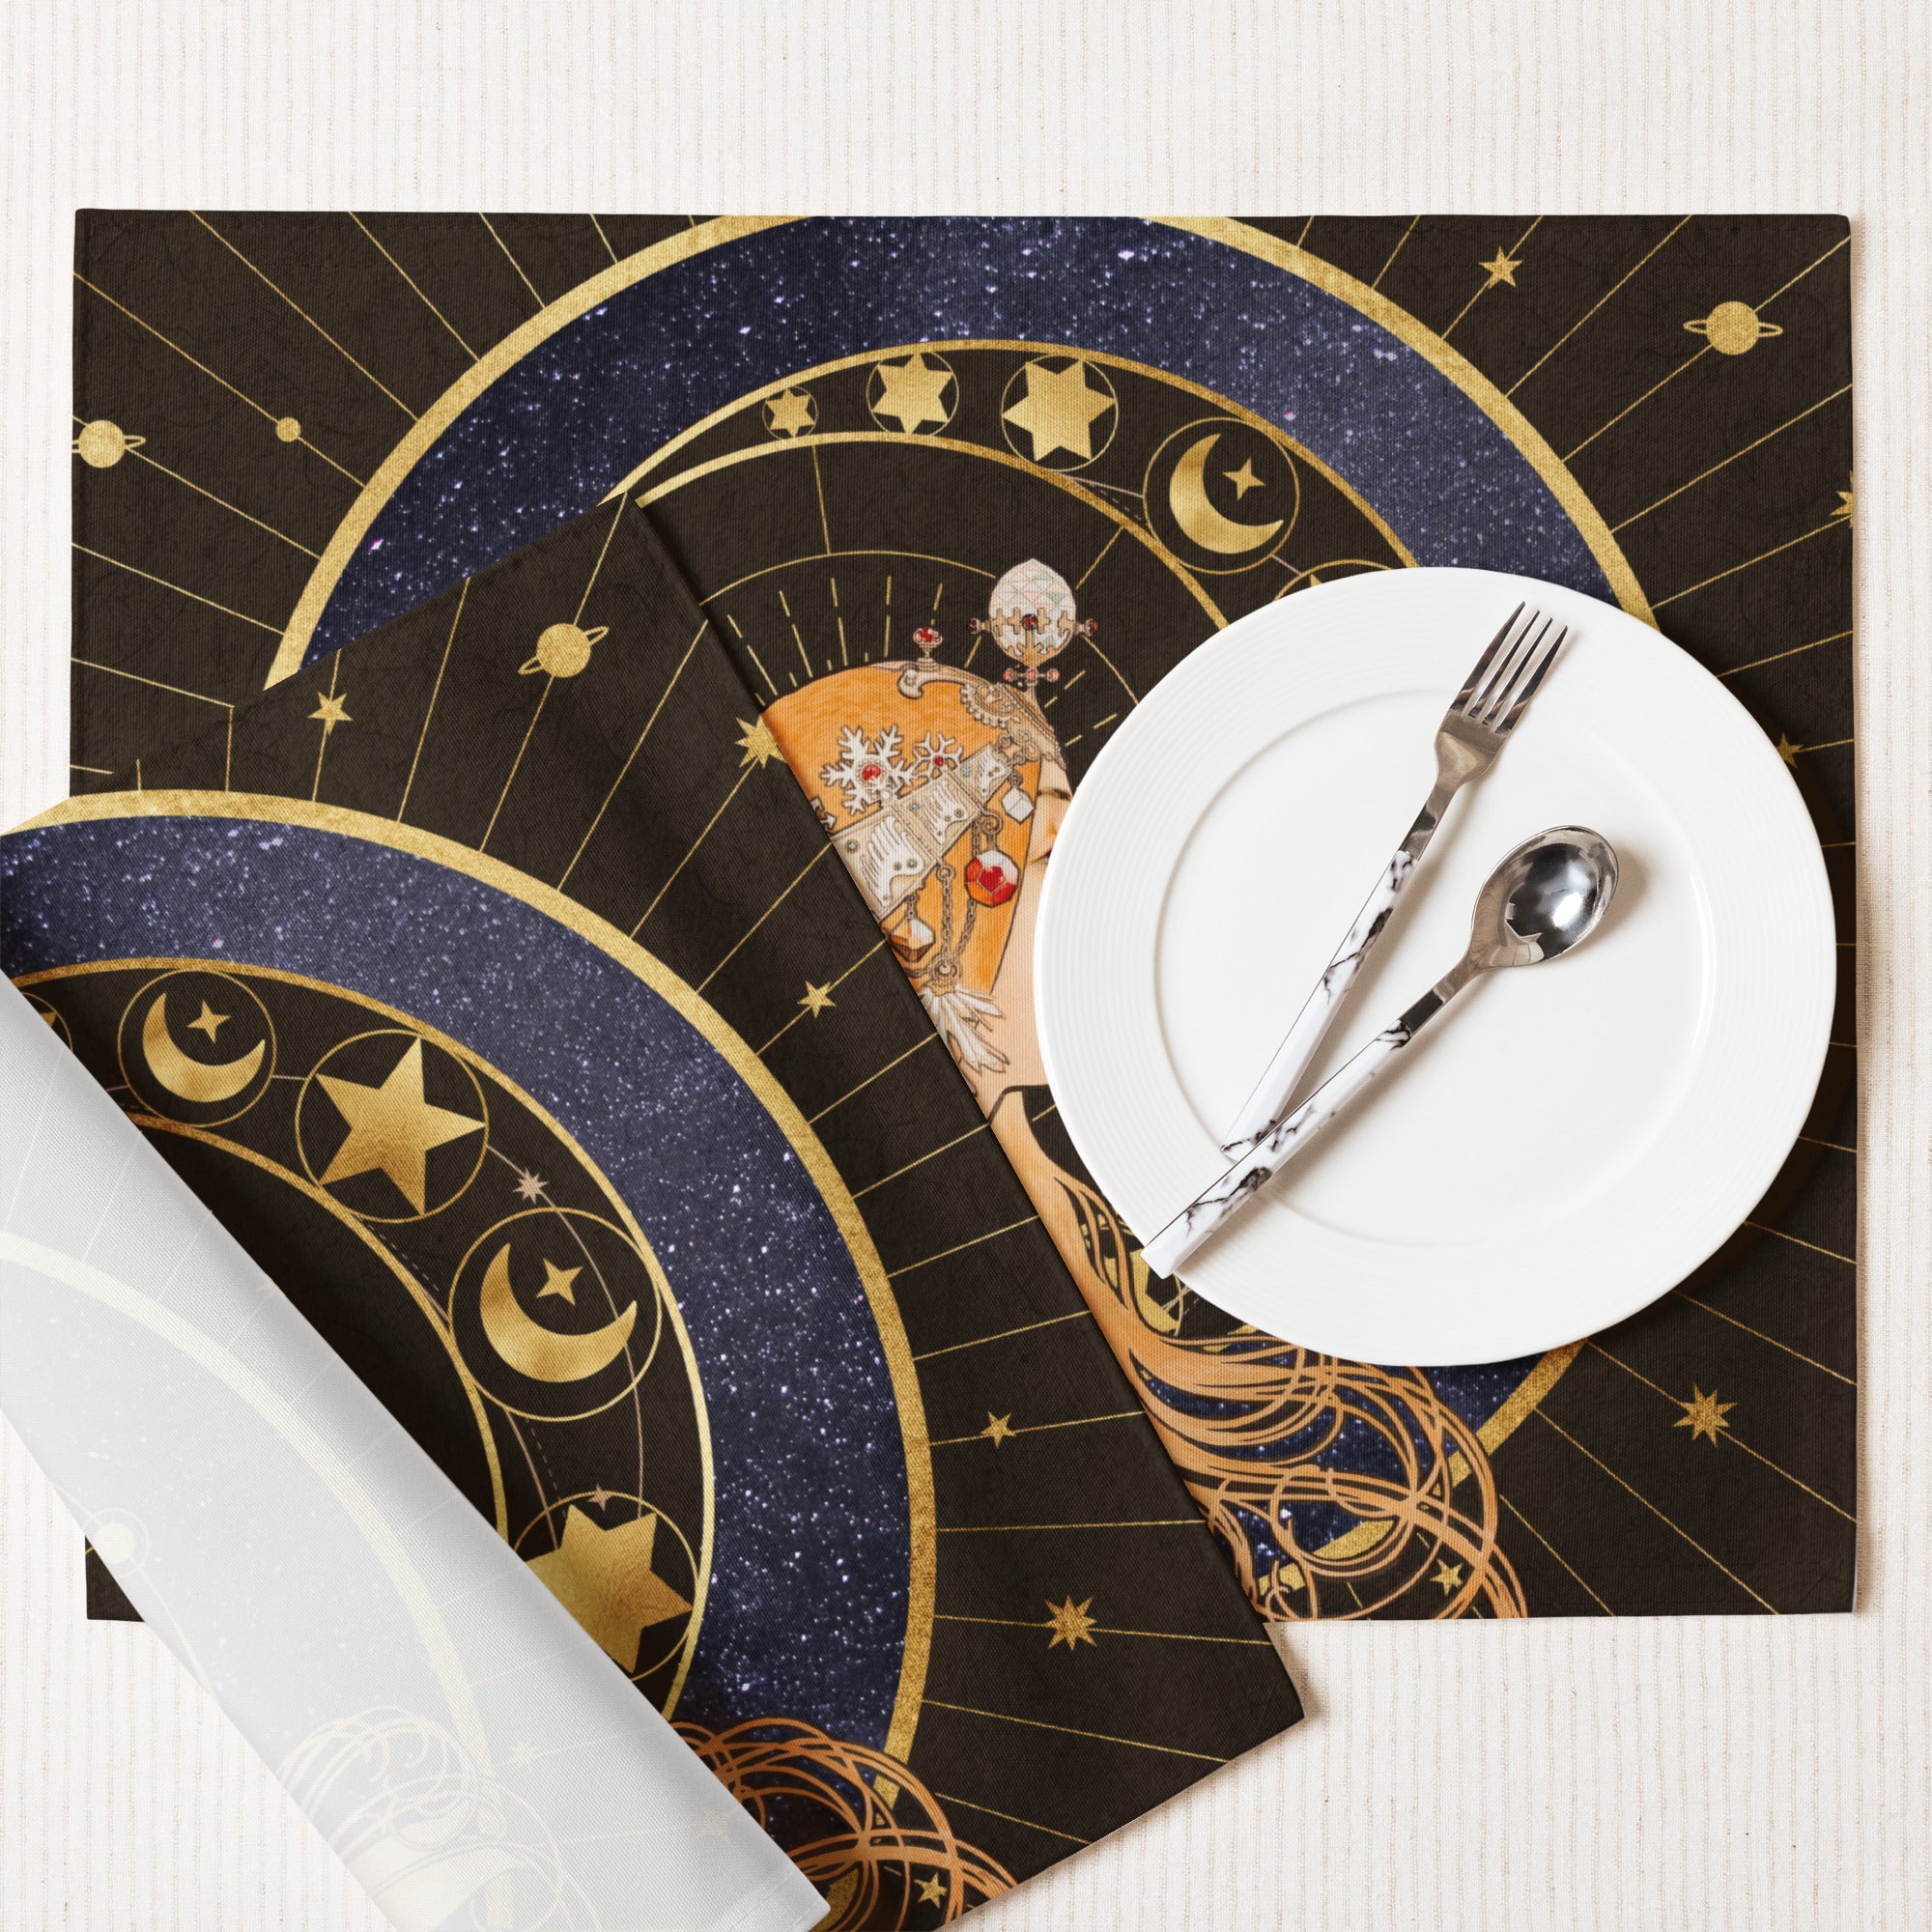 Lady of the Stars, Mucha Placemat Set, 18in x 24in (45.7 cm × 35.5 cm), Set of 4